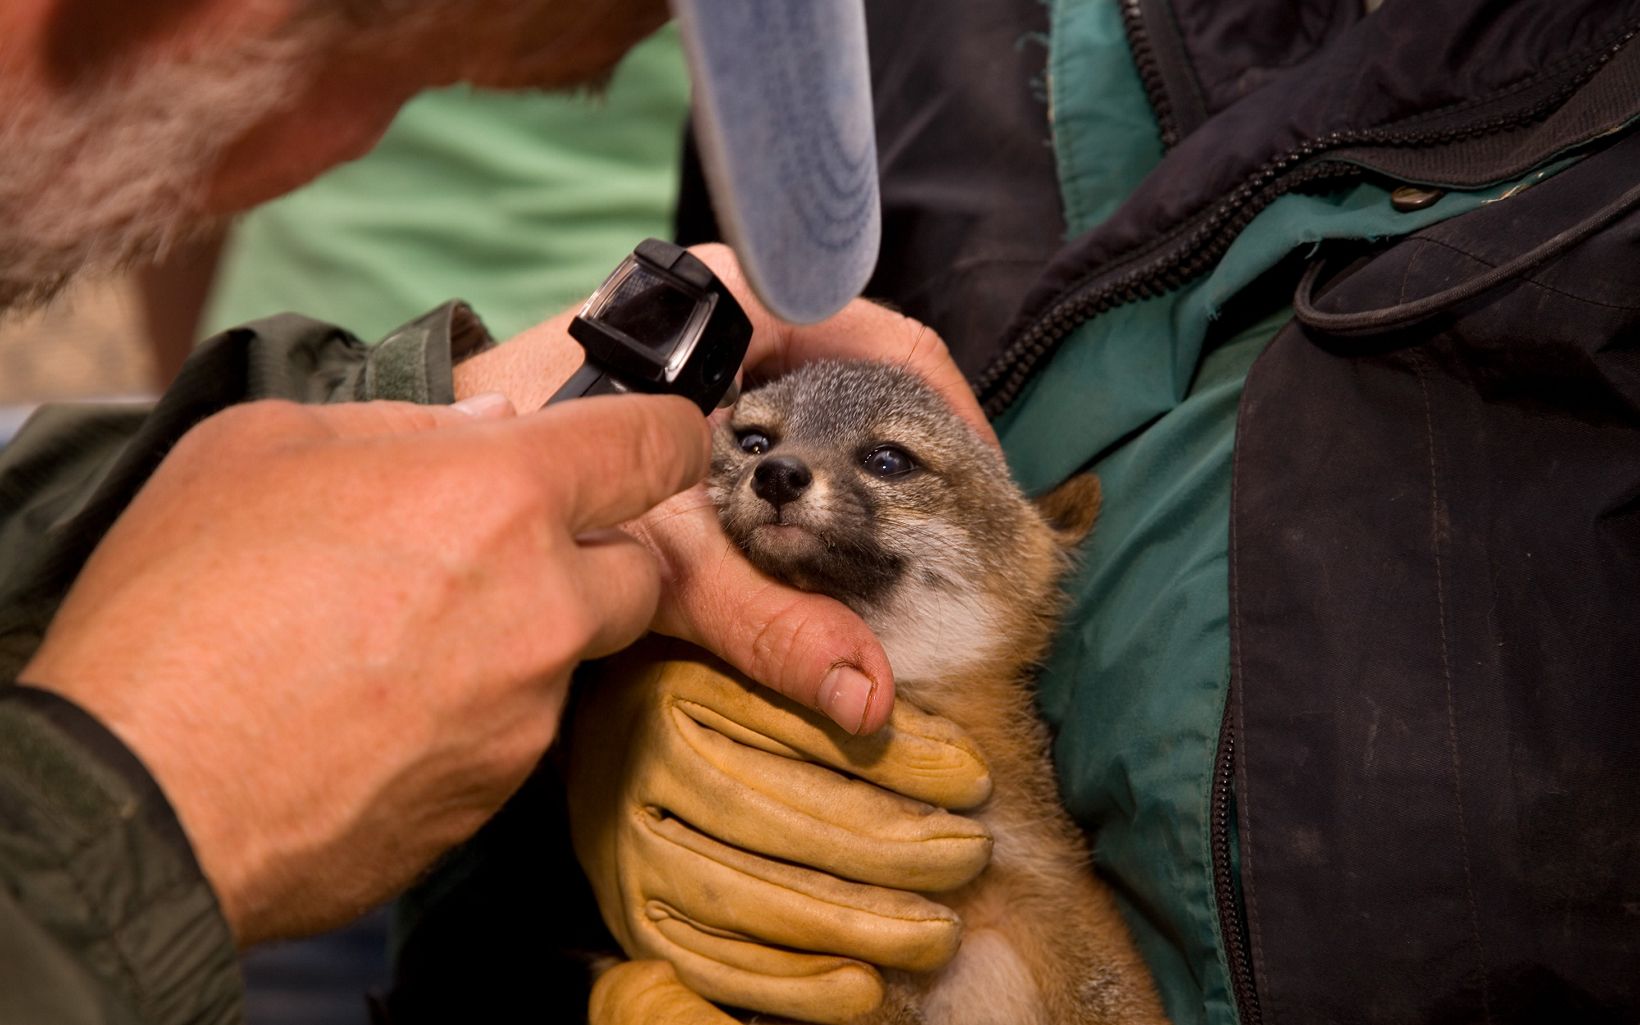 Veterinarian Dr. Vickers of the Institute for Wildlife Studies (IWS) examines captive foxes on Santa Cruz Island. The fur and bodies are examined for health; they are weighed and given shots.  © Miguel Luis Fairbanks